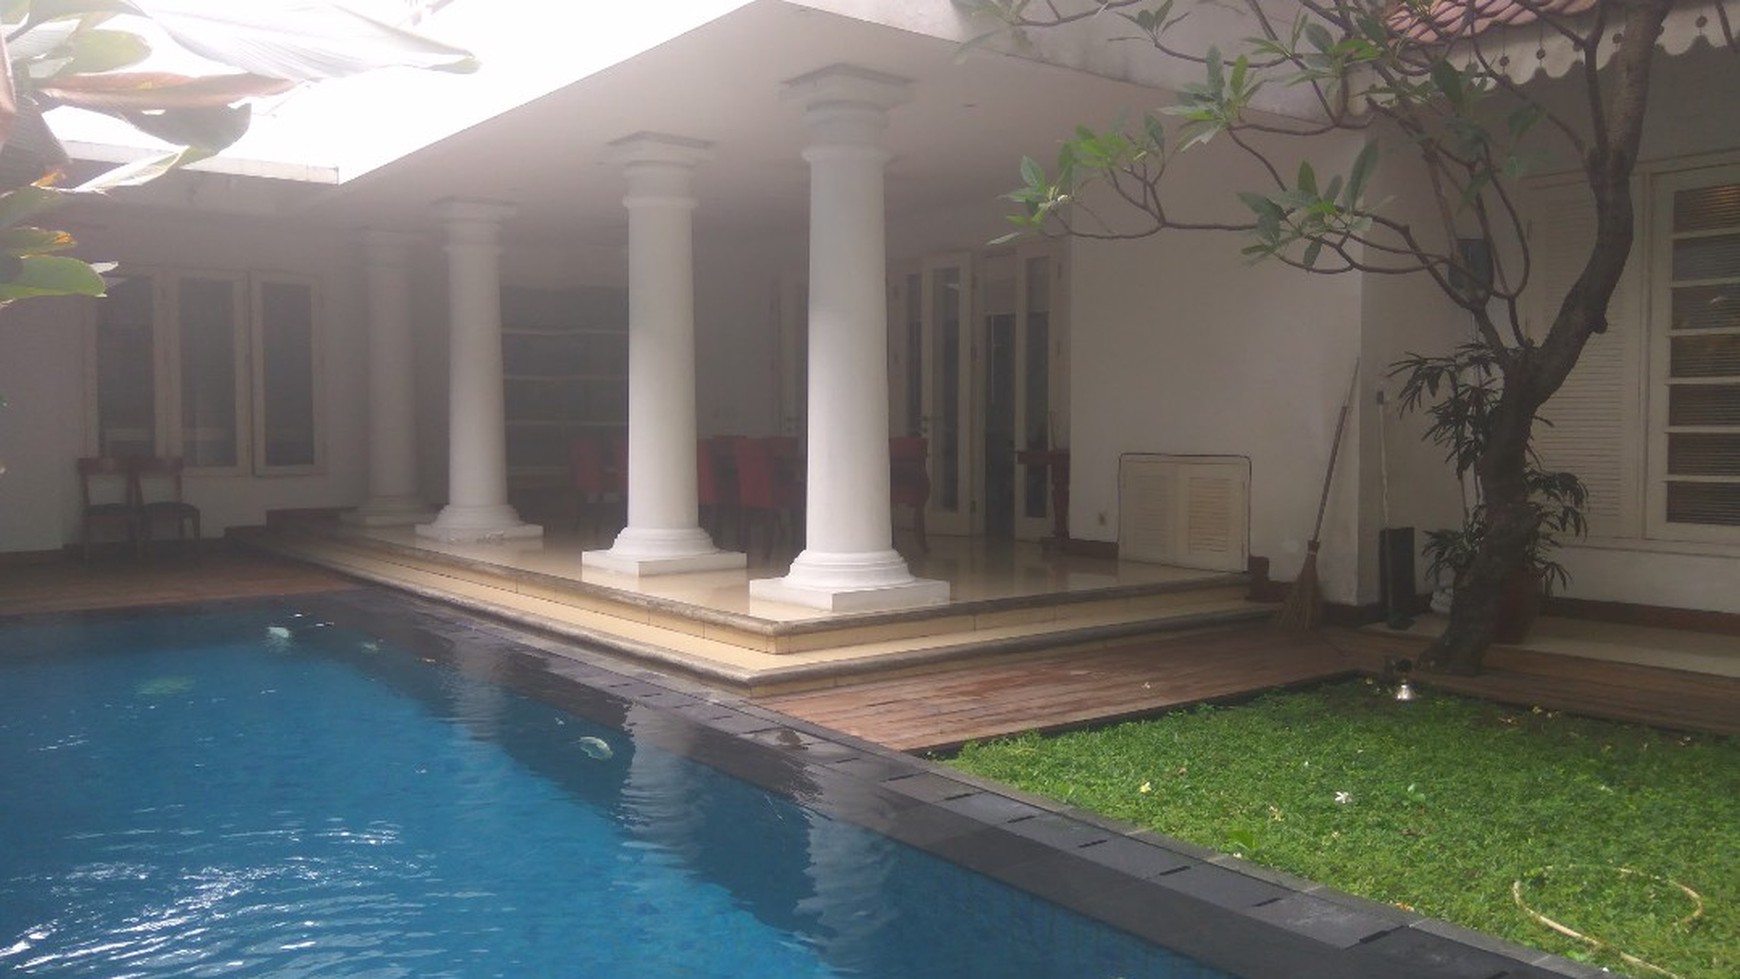 Comfortable house and nice house in menteng area "the price can be negotiable '